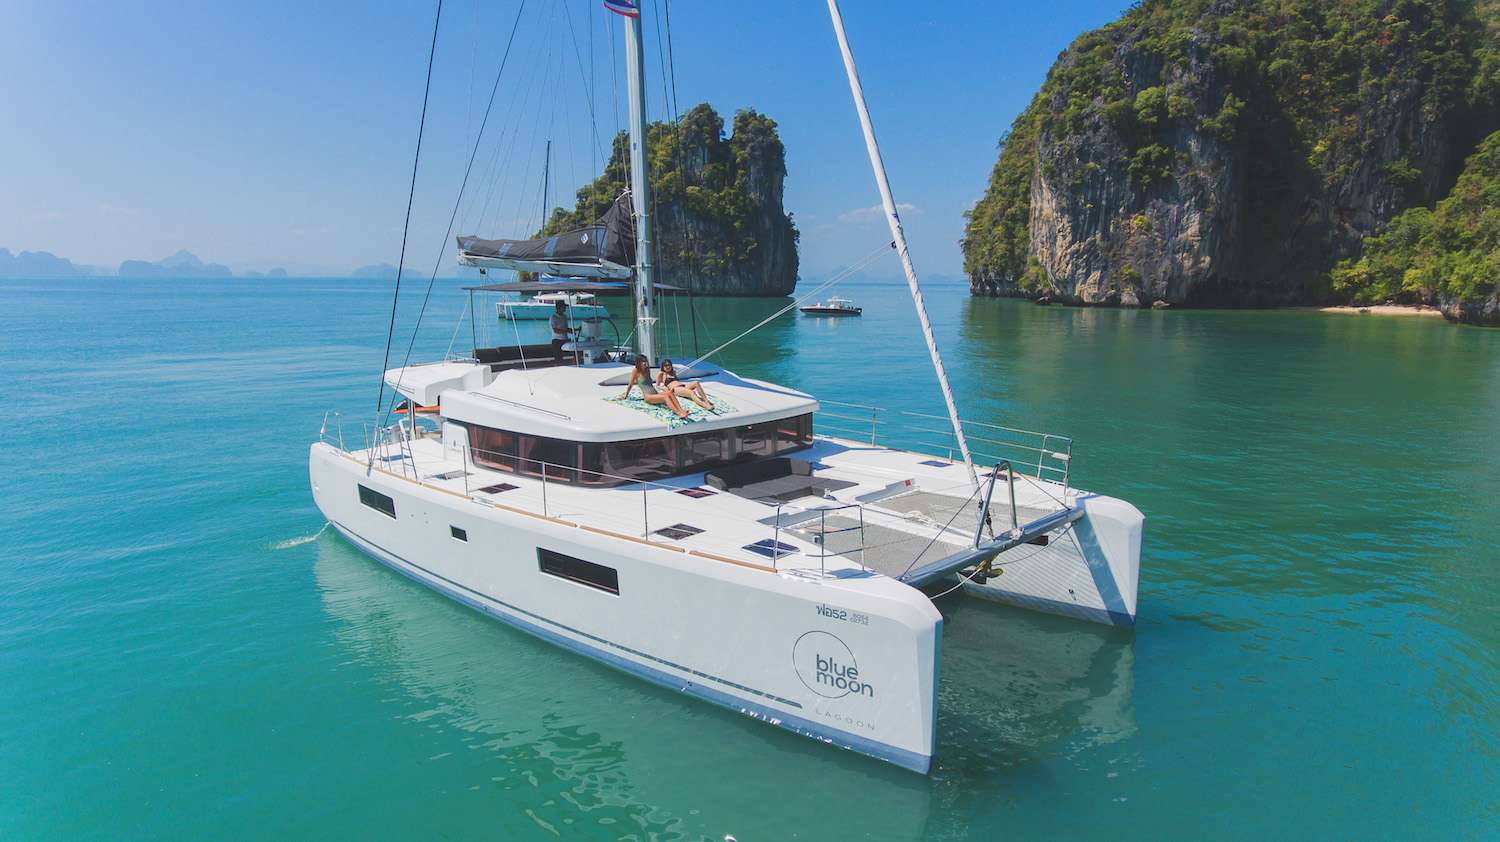 blue moon - Yacht Charter Malaysia & Boat hire in Indian Ocean & SE Asia 2